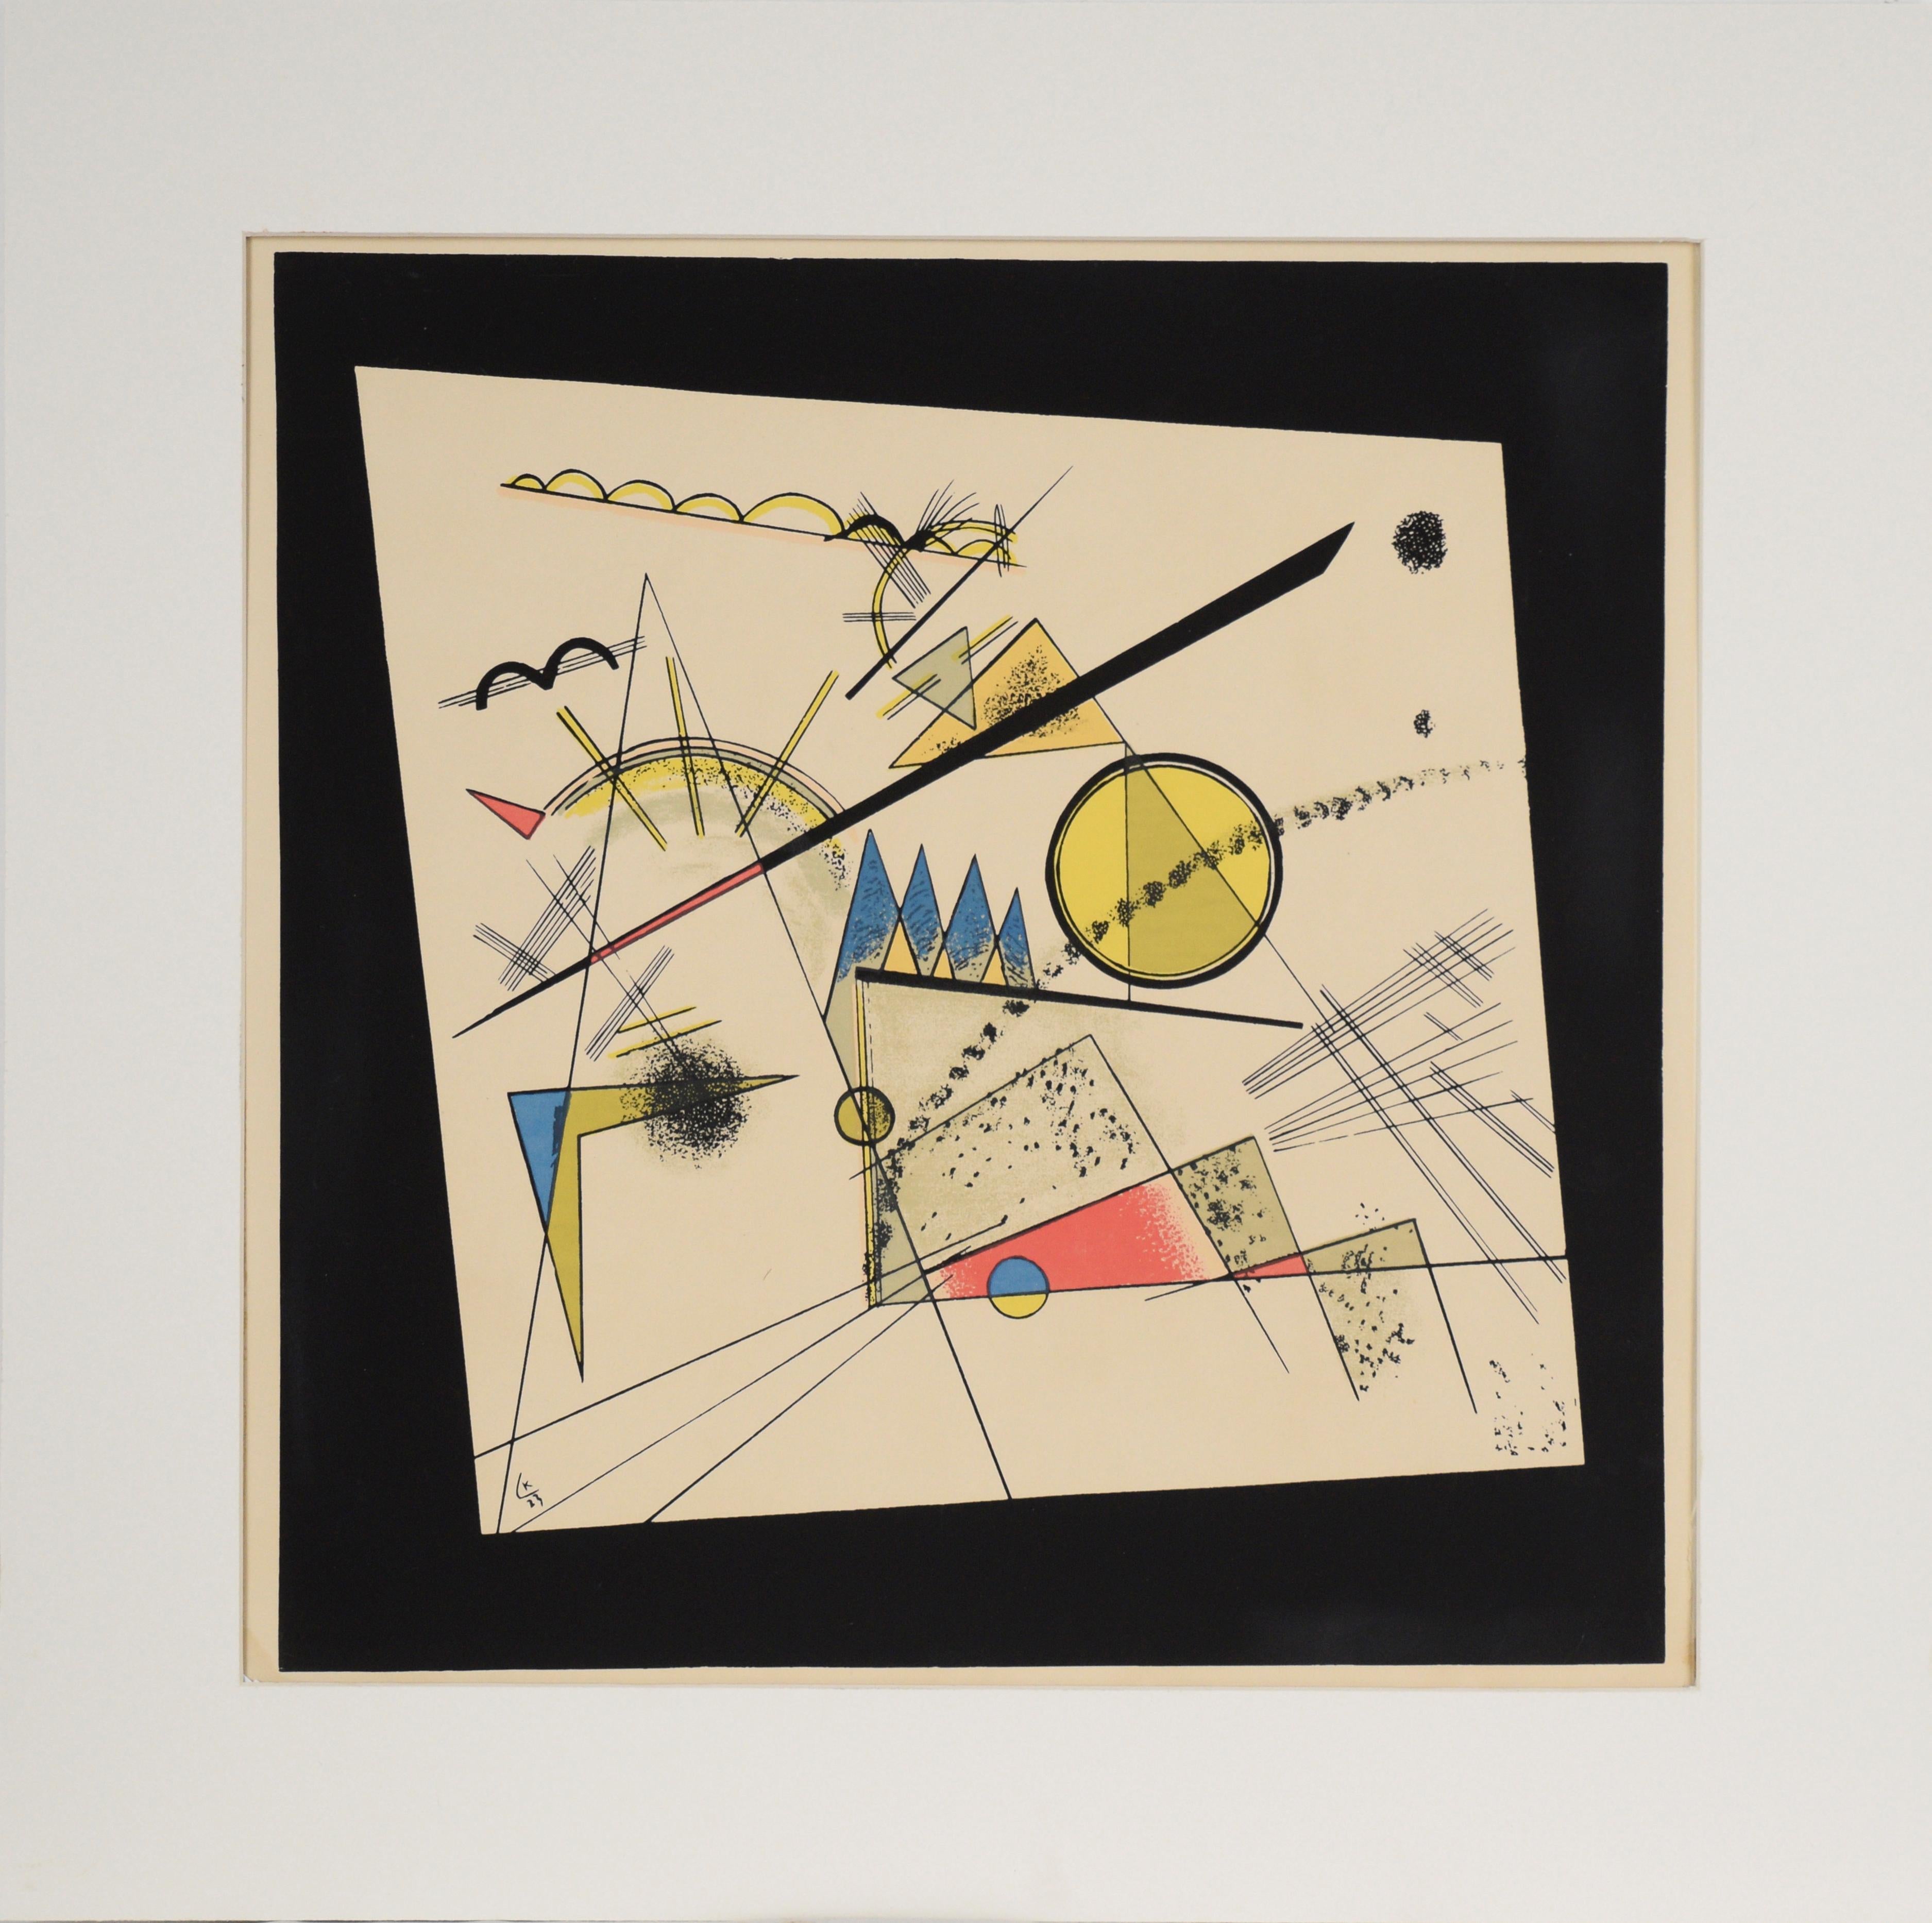 Vasily Kandinsky Abstract Print - "In The Black Square" - Screen Print Poster